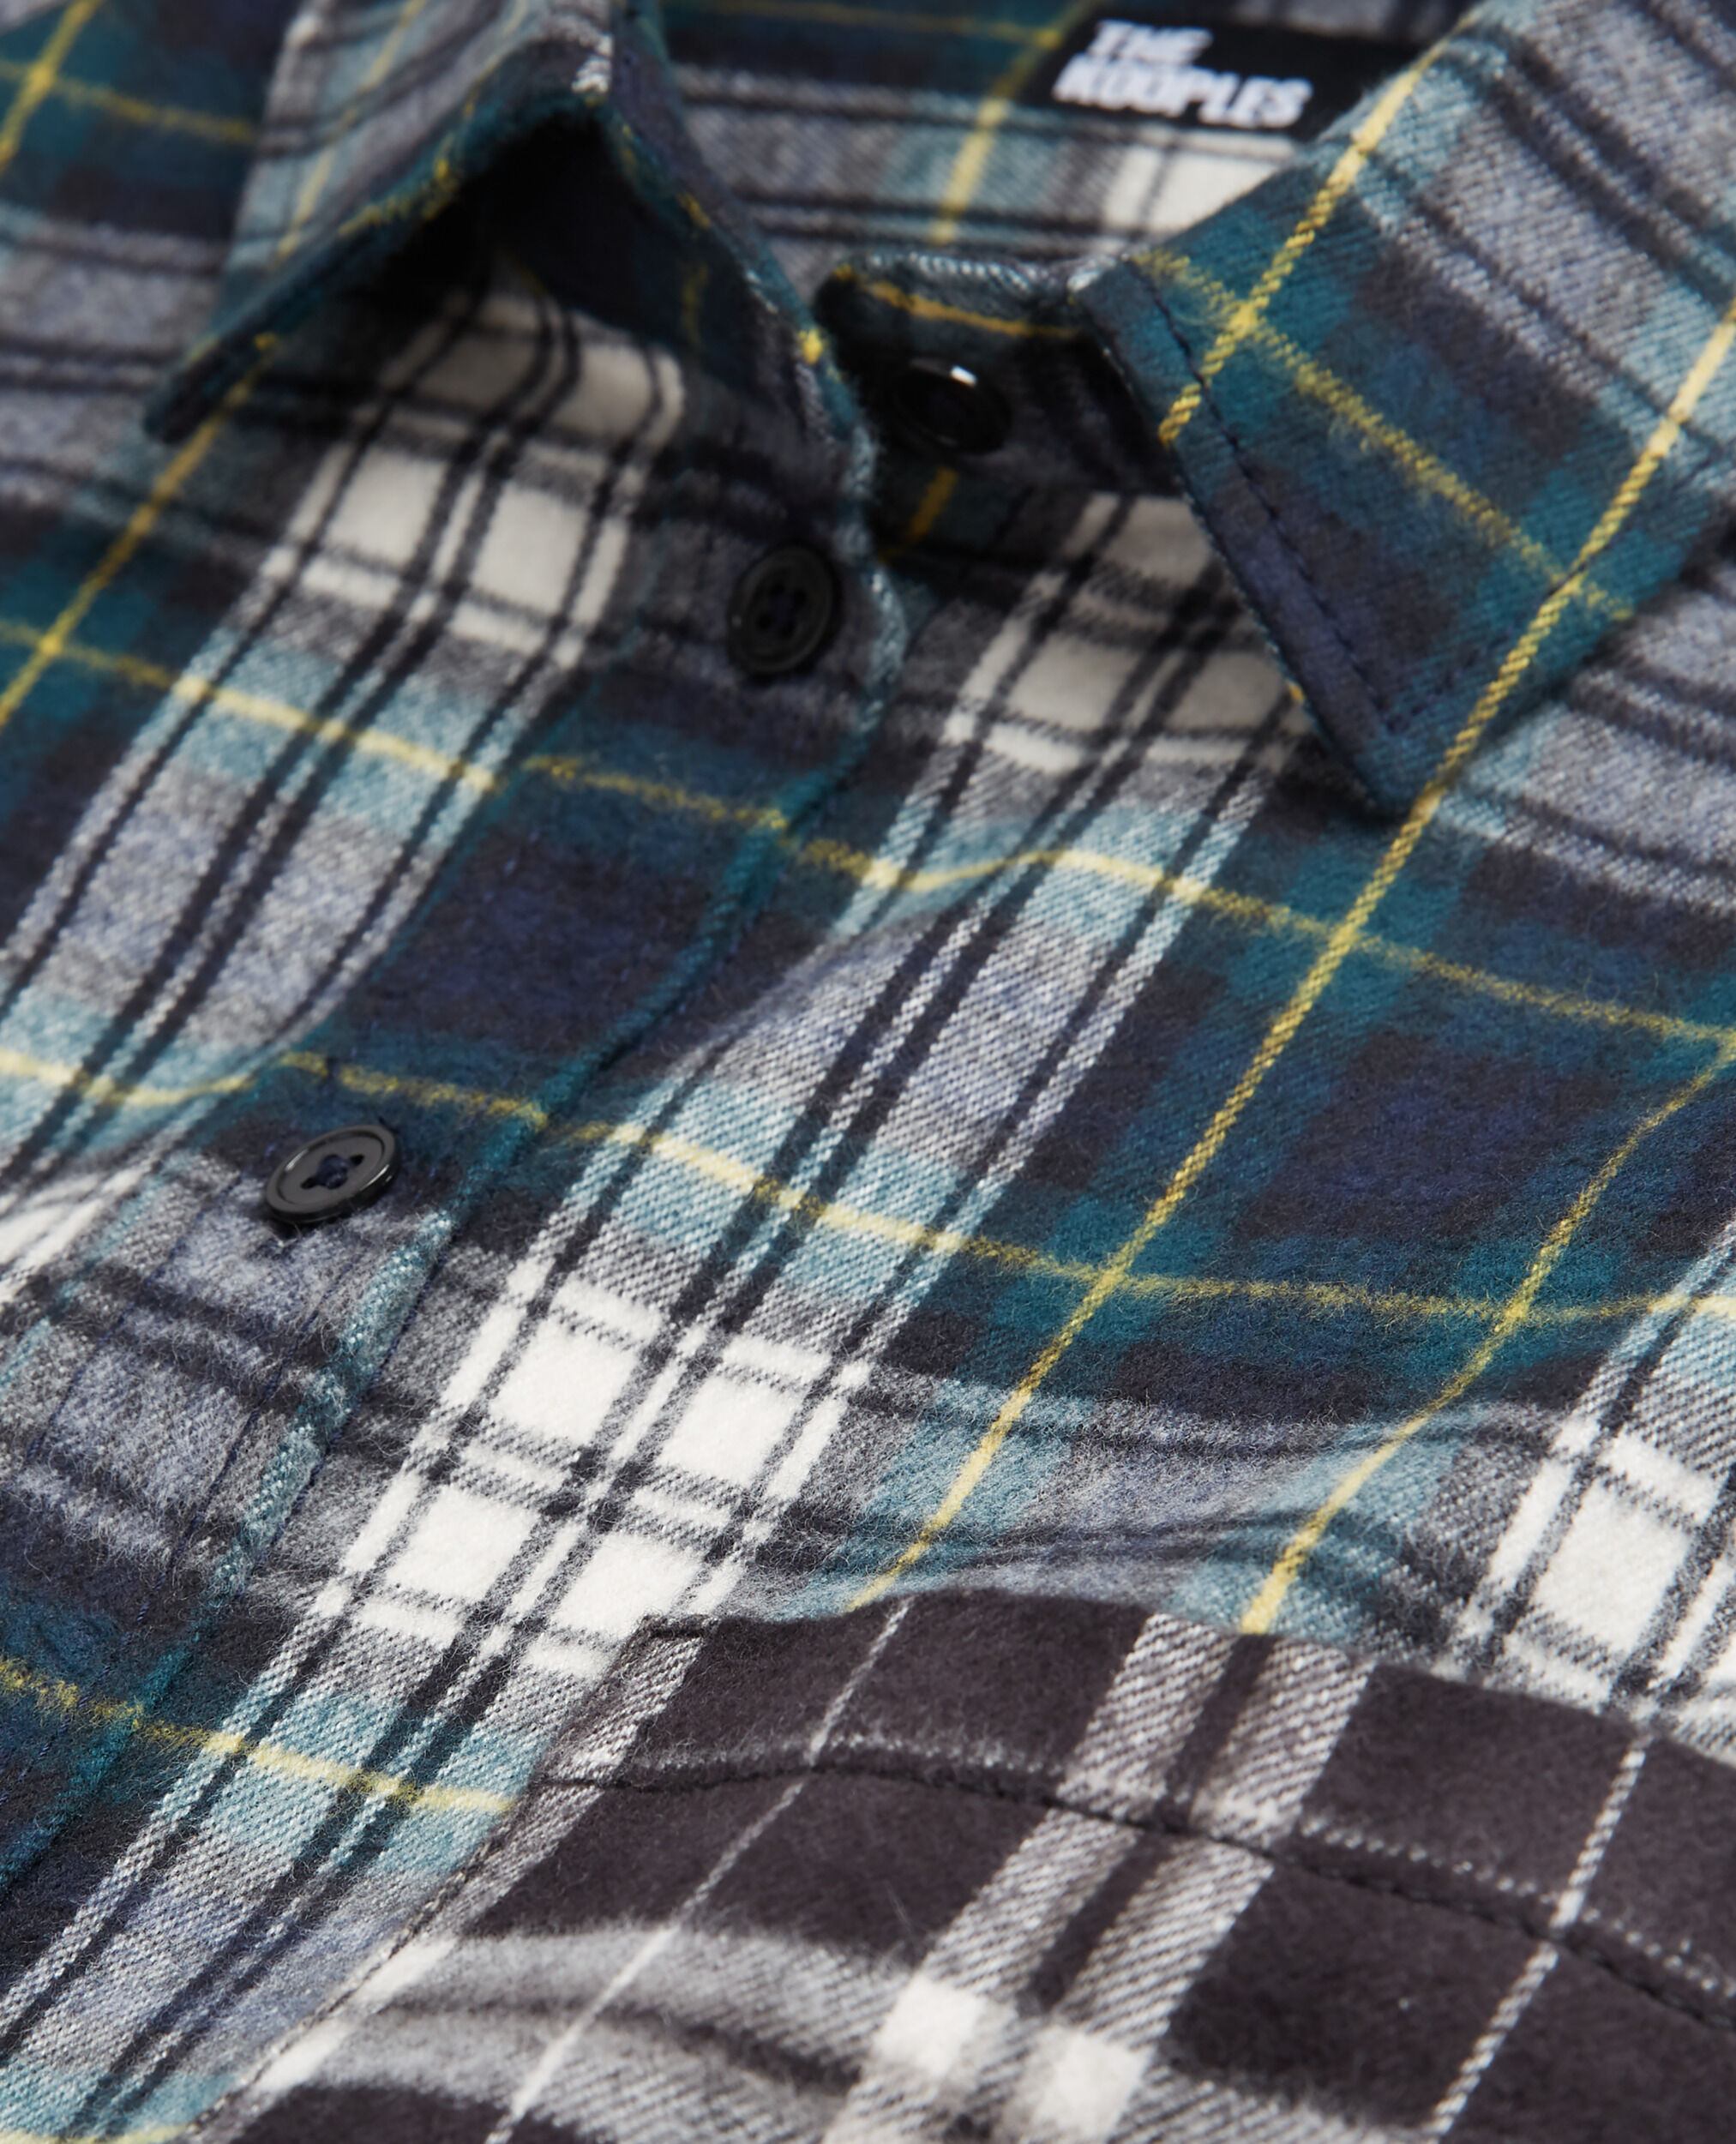 Overshirt with check motif, BOTTLE GREEN, hi-res image number null